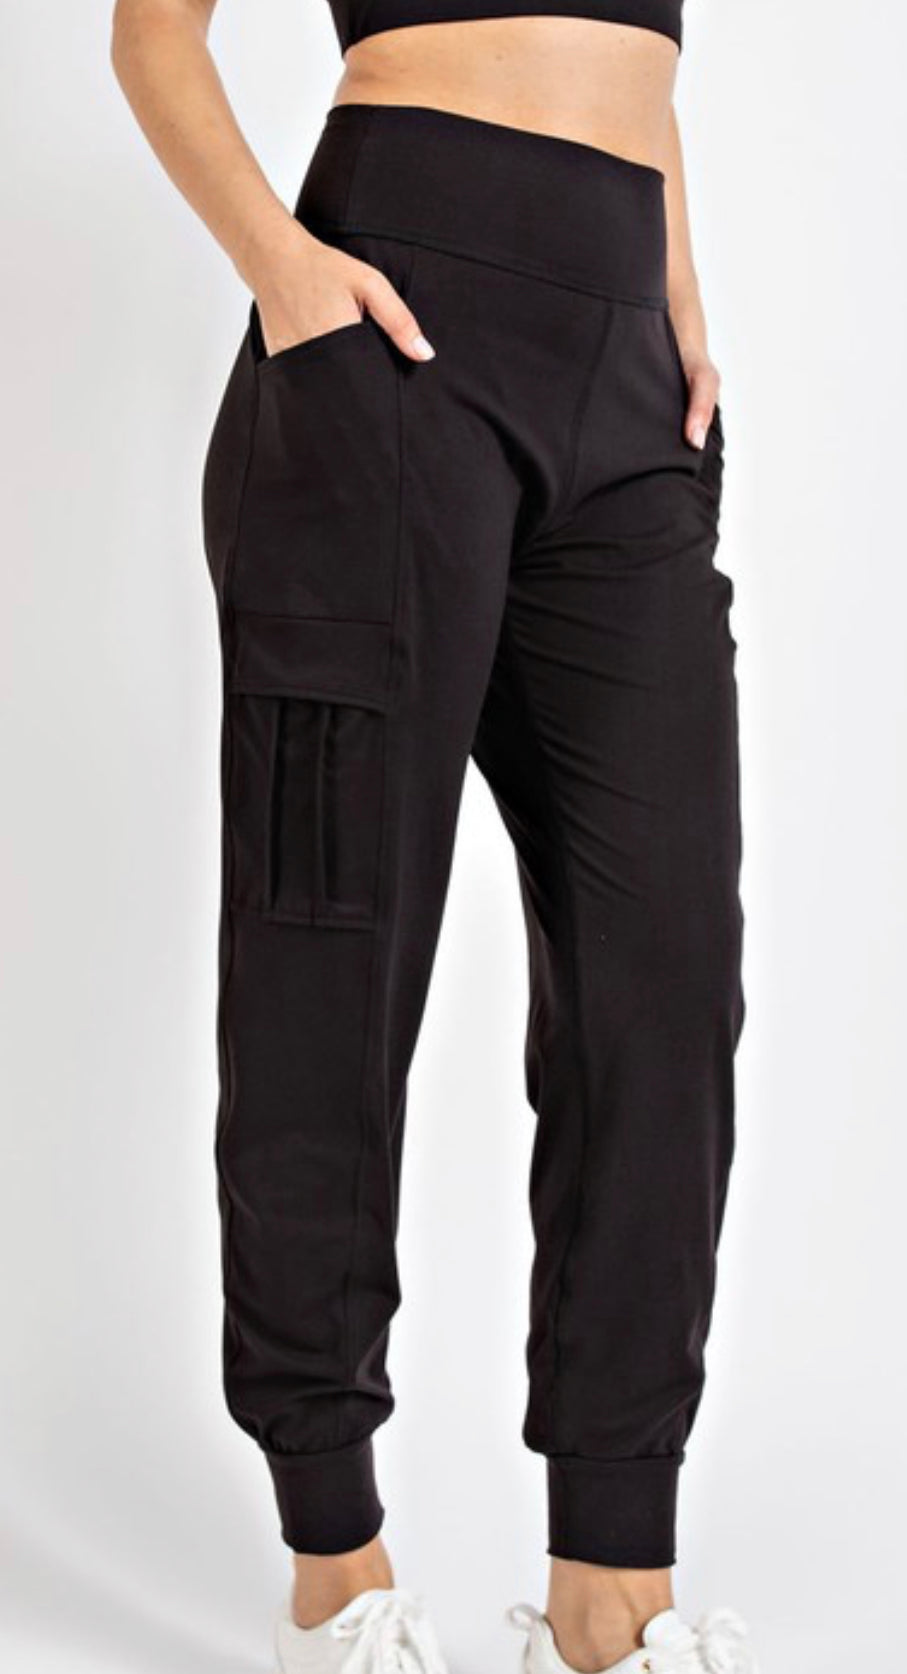 Butter joggers with side pockets